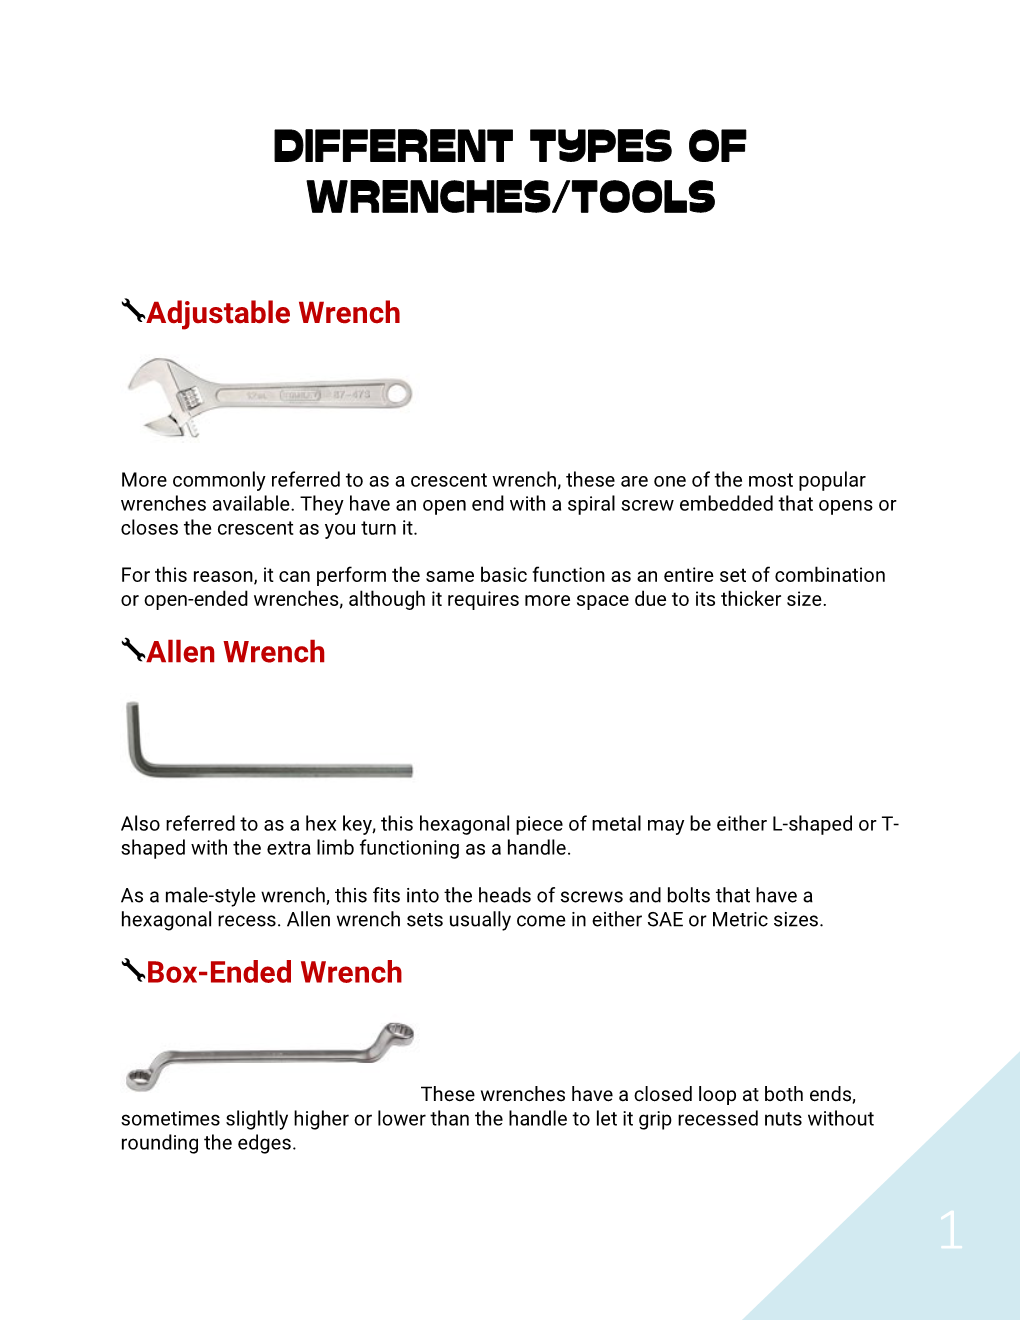 Different Types of Wrenches/Tools